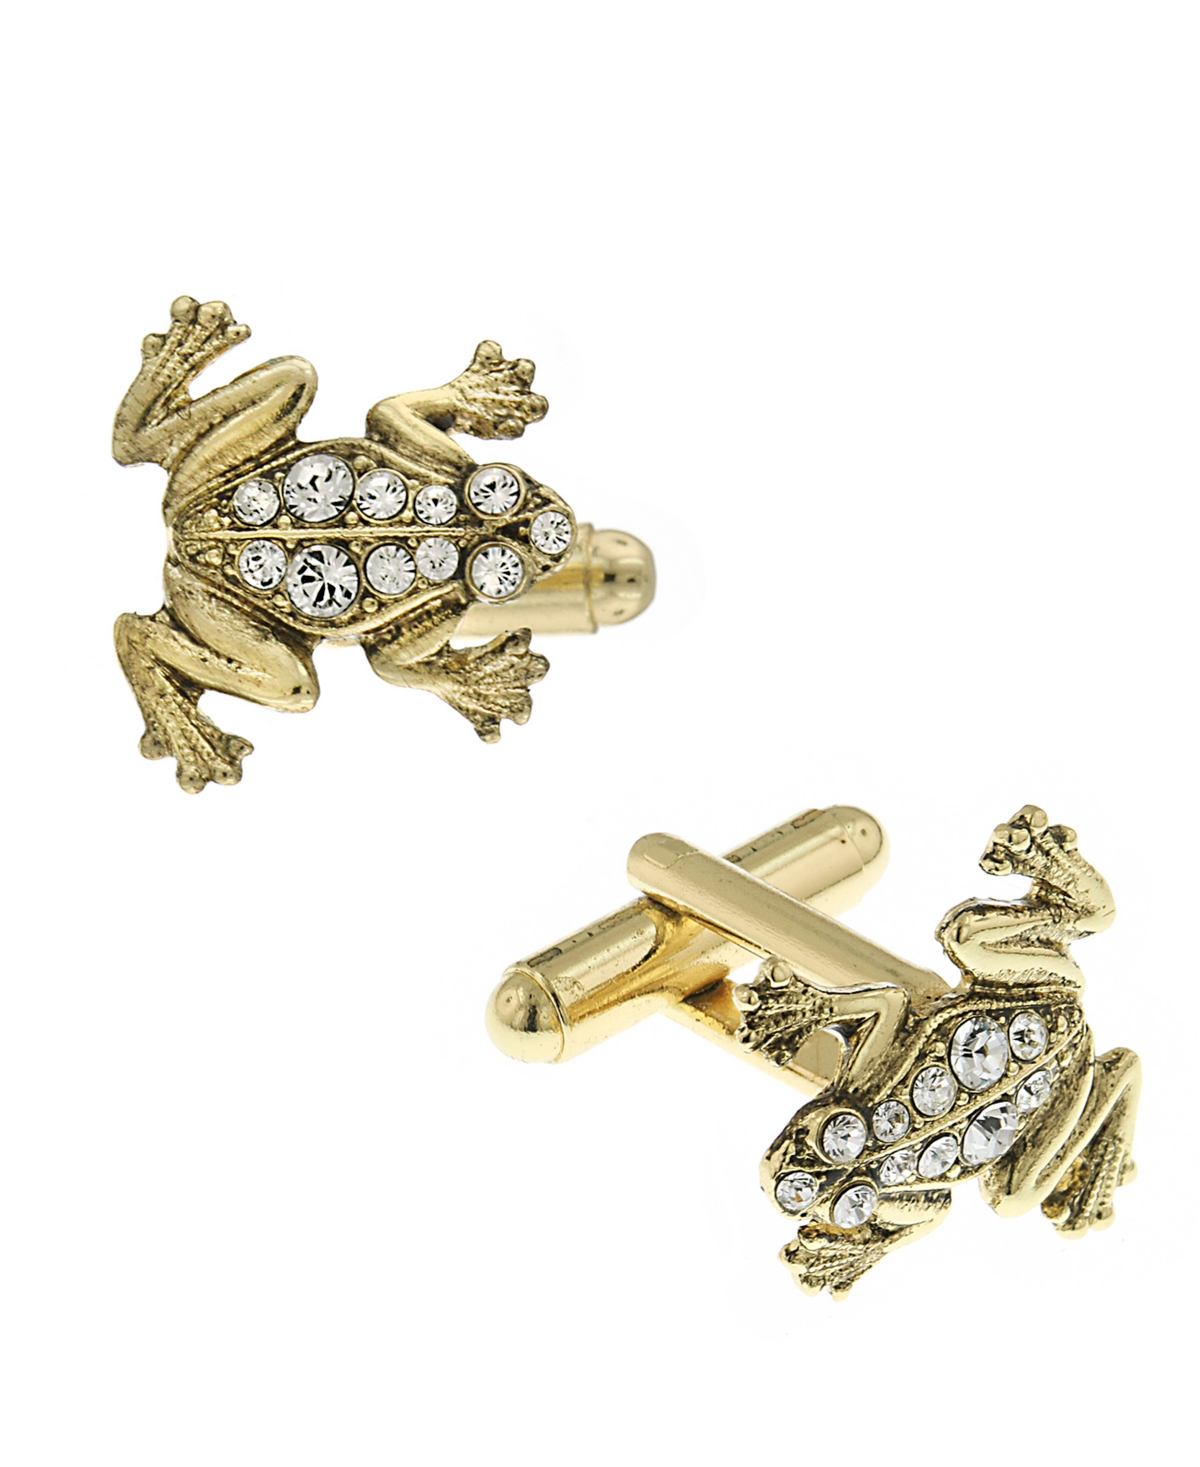 Jewelry 14K Gold Plated Crystal Frog Cufflinks - Blue